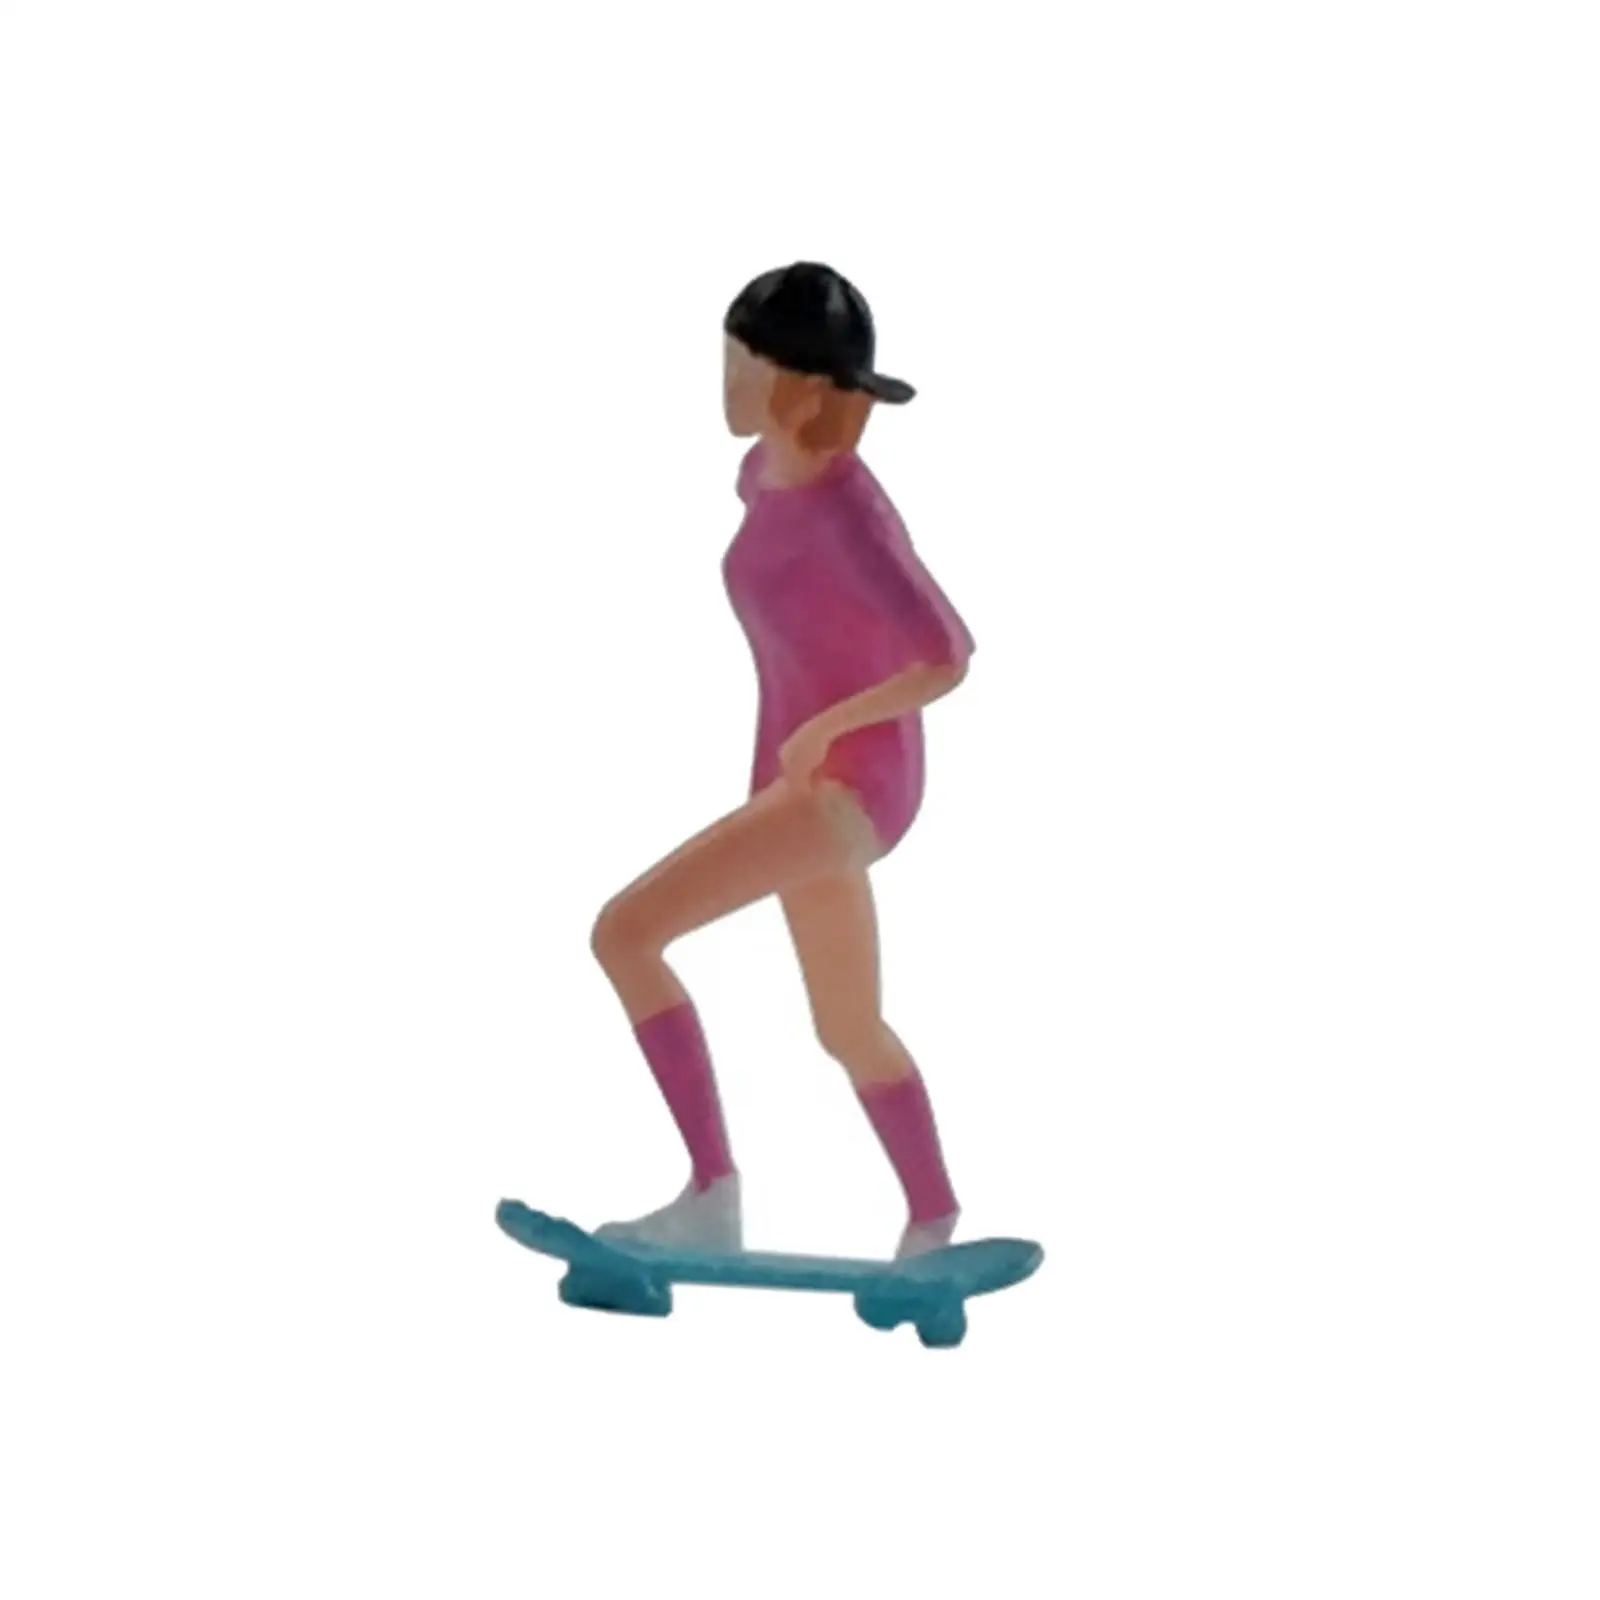 1/64 Scale People Figurines Skateboard Girl People for Dioramas Layout Decor